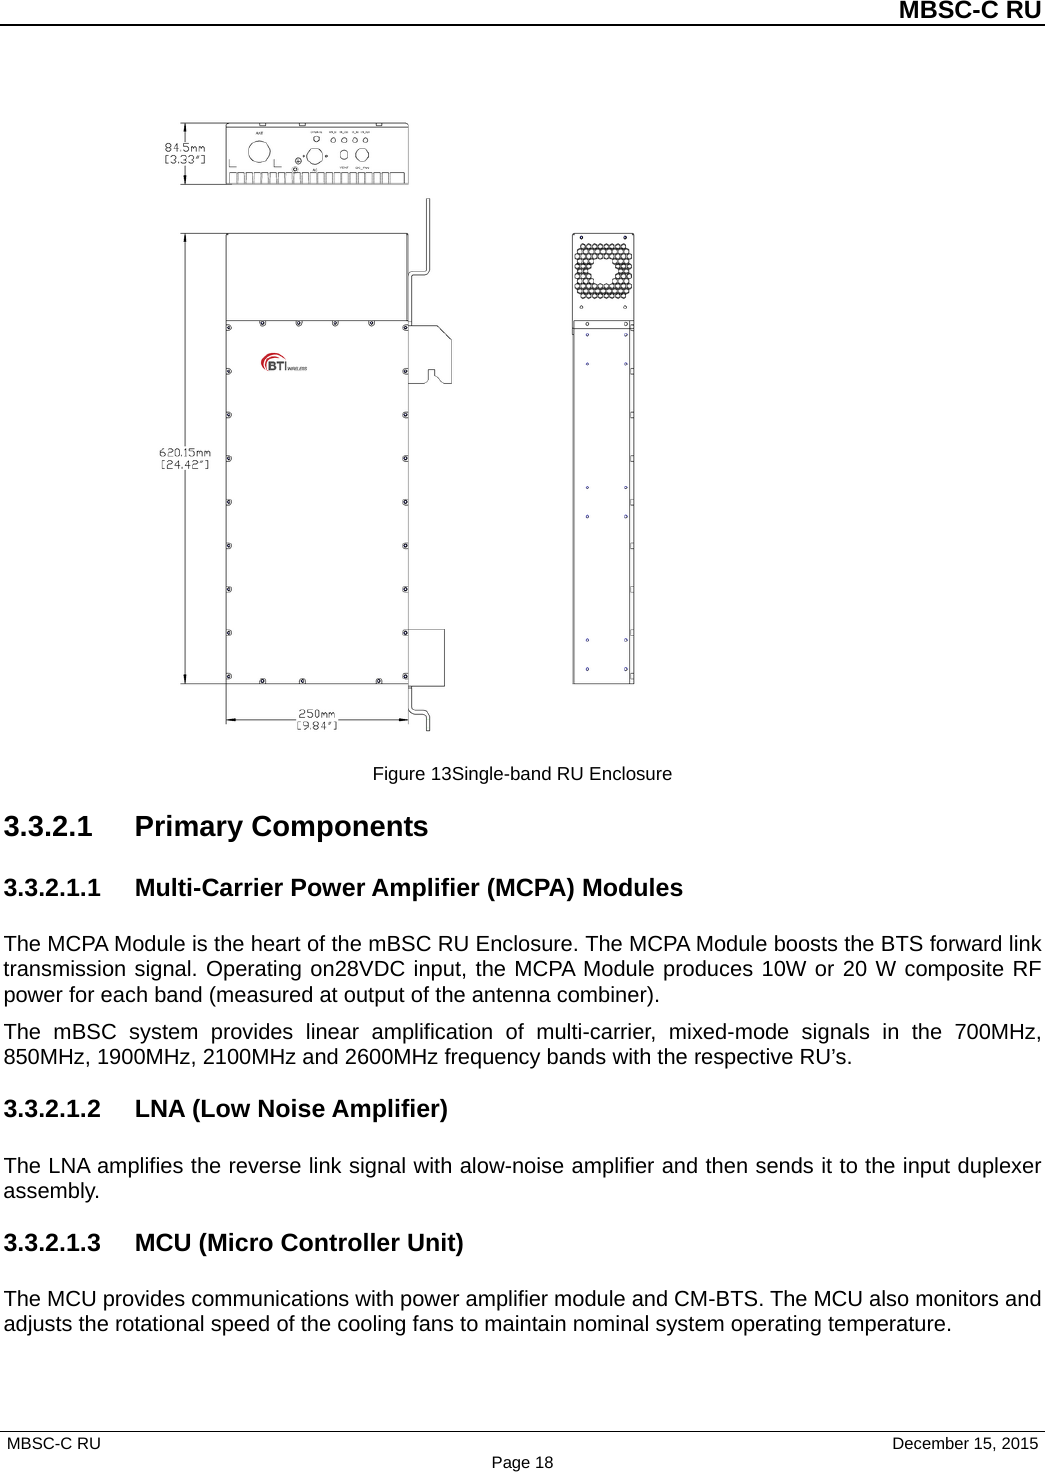 MBSC-C RU MBSC-C RU   December 15, 2015 Page 18Figure 13Single-band RU Enclosure 3.3.2.1 Primary Components 3.3.2.1.1 Multi-Carrier Power Amplifier (MCPA) Modules The MCPA Module is the heart of the mBSC RU Enclosure. The MCPA Module boosts the BTS forward link transmission signal. Operating on28VDC input, the MCPA Module produces 10W or 20 W composite RF power for each band (measured at output of the antenna combiner). The mBSC system provides linear amplification of multi-carrier, mixed-mode signals in the 700MHz, 850MHz, 1900MHz, 2100MHz and 2600MHz frequency bands with the respective RU’s. 3.3.2.1.2 LNA (Low Noise Amplifier) The LNA amplifies the reverse link signal with alow-noise amplifier and then sends it to the input duplexer assembly.   3.3.2.1.3 MCU (Micro Controller Unit) The MCU provides communications with power amplifier module and CM-BTS. The MCU also monitors and adjusts the rotational speed of the cooling fans to maintain nominal system operating temperature. 